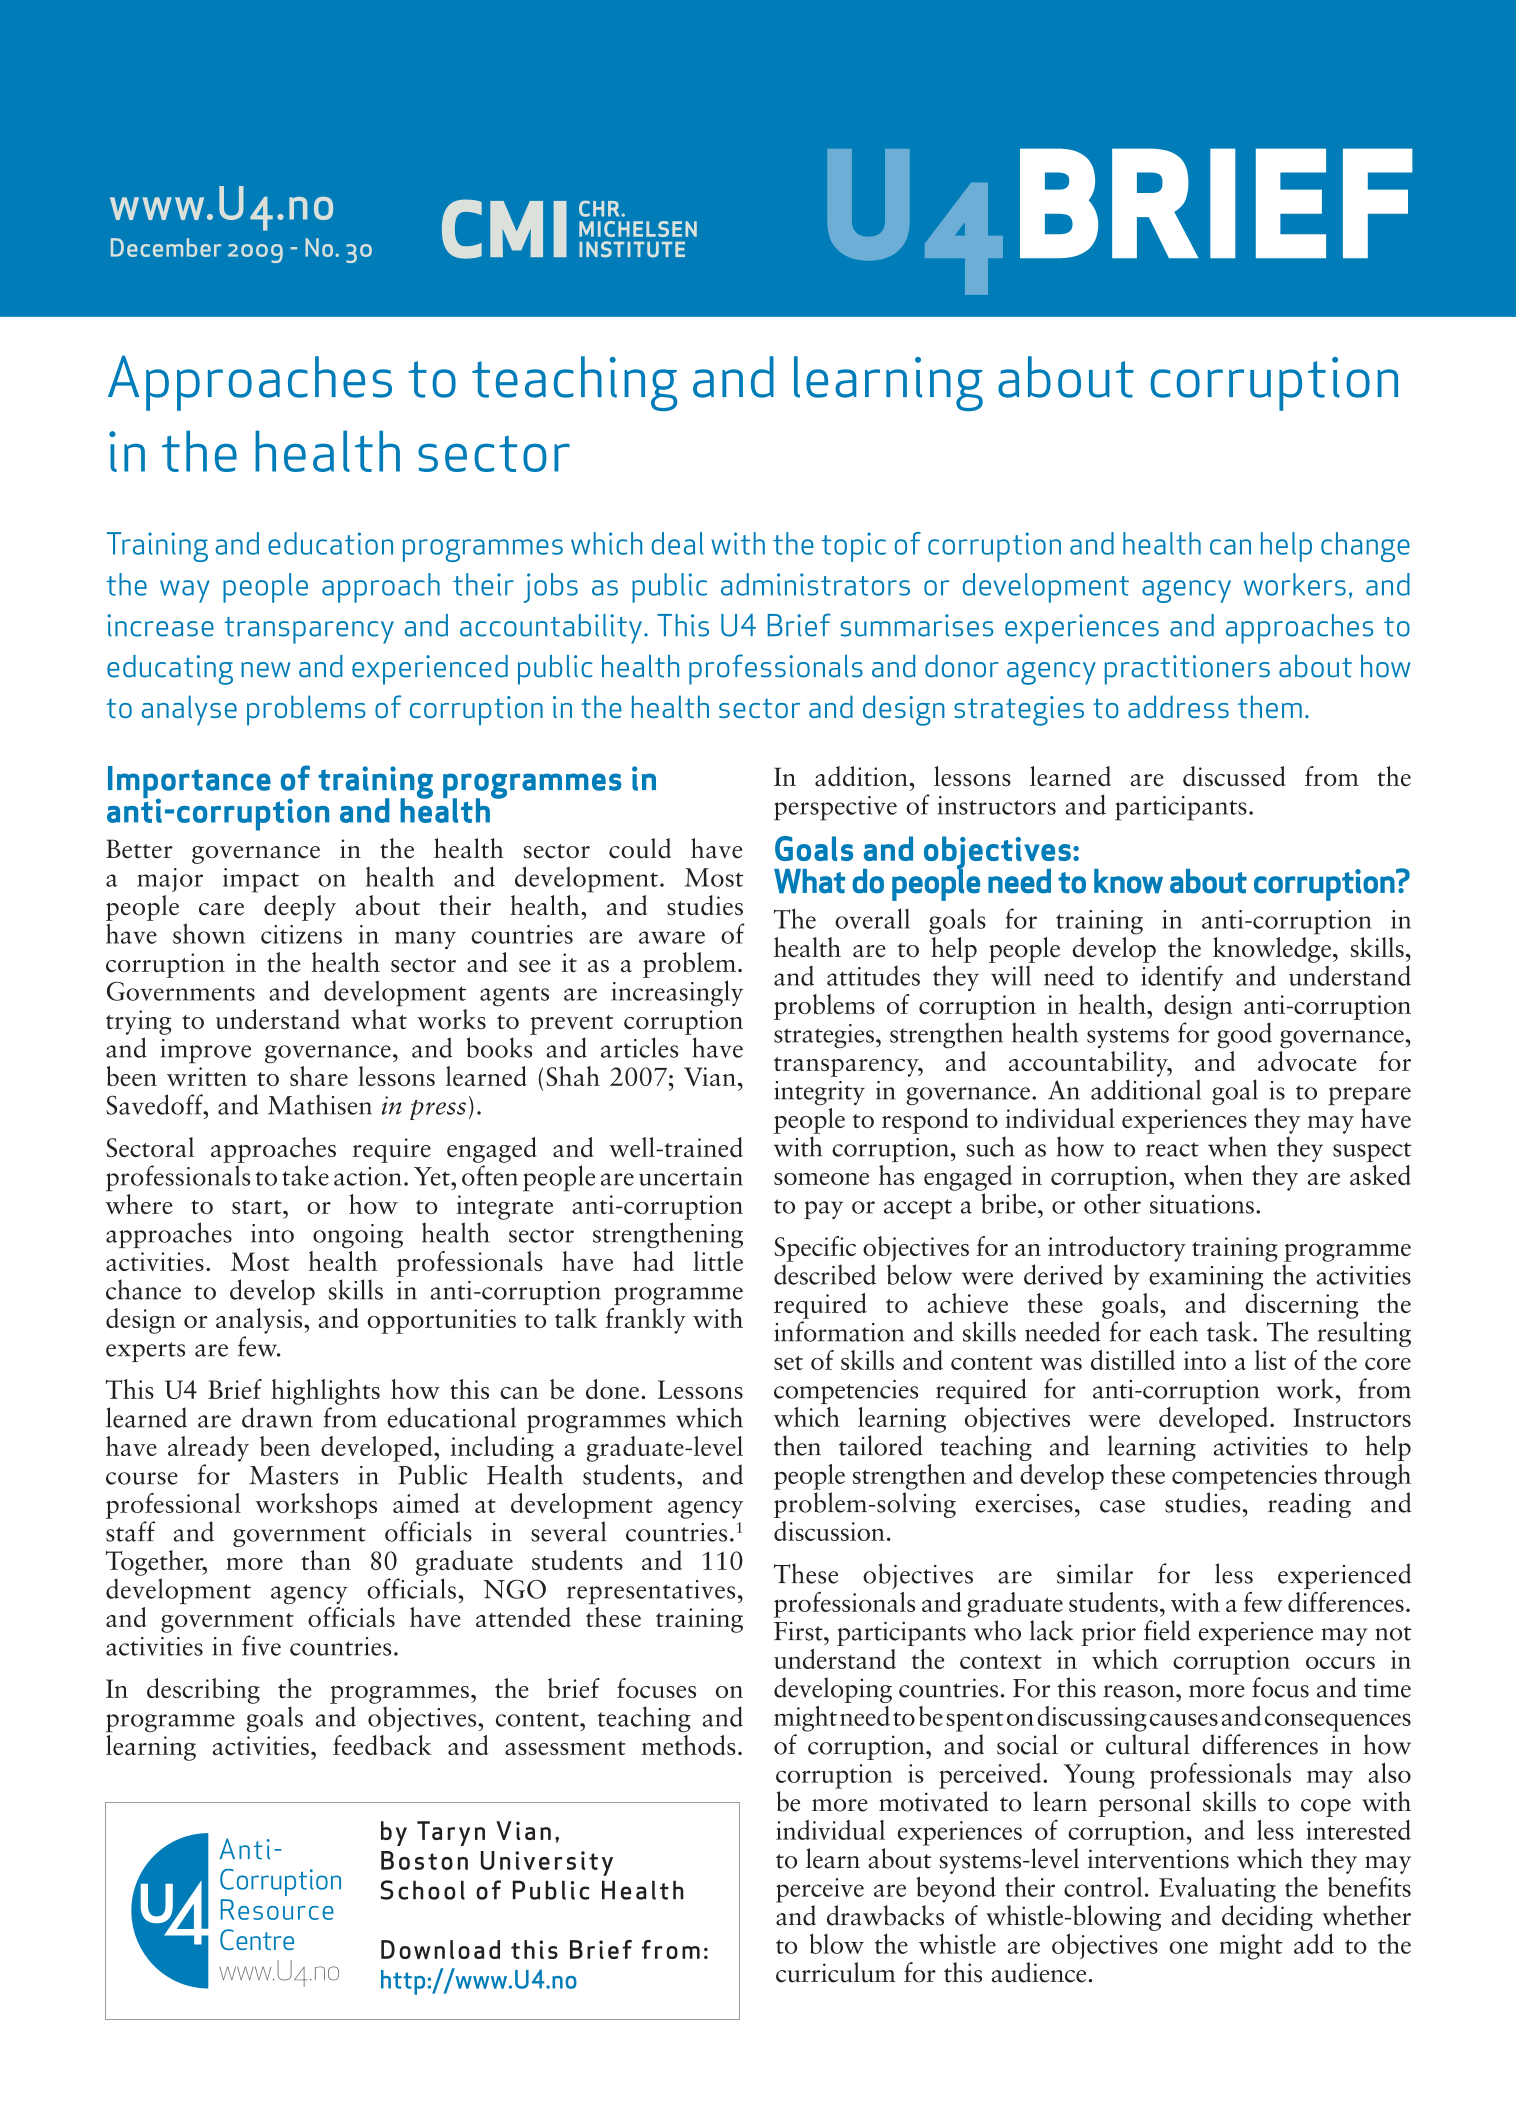 Approaches to teaching and learning about corruption in the health sector